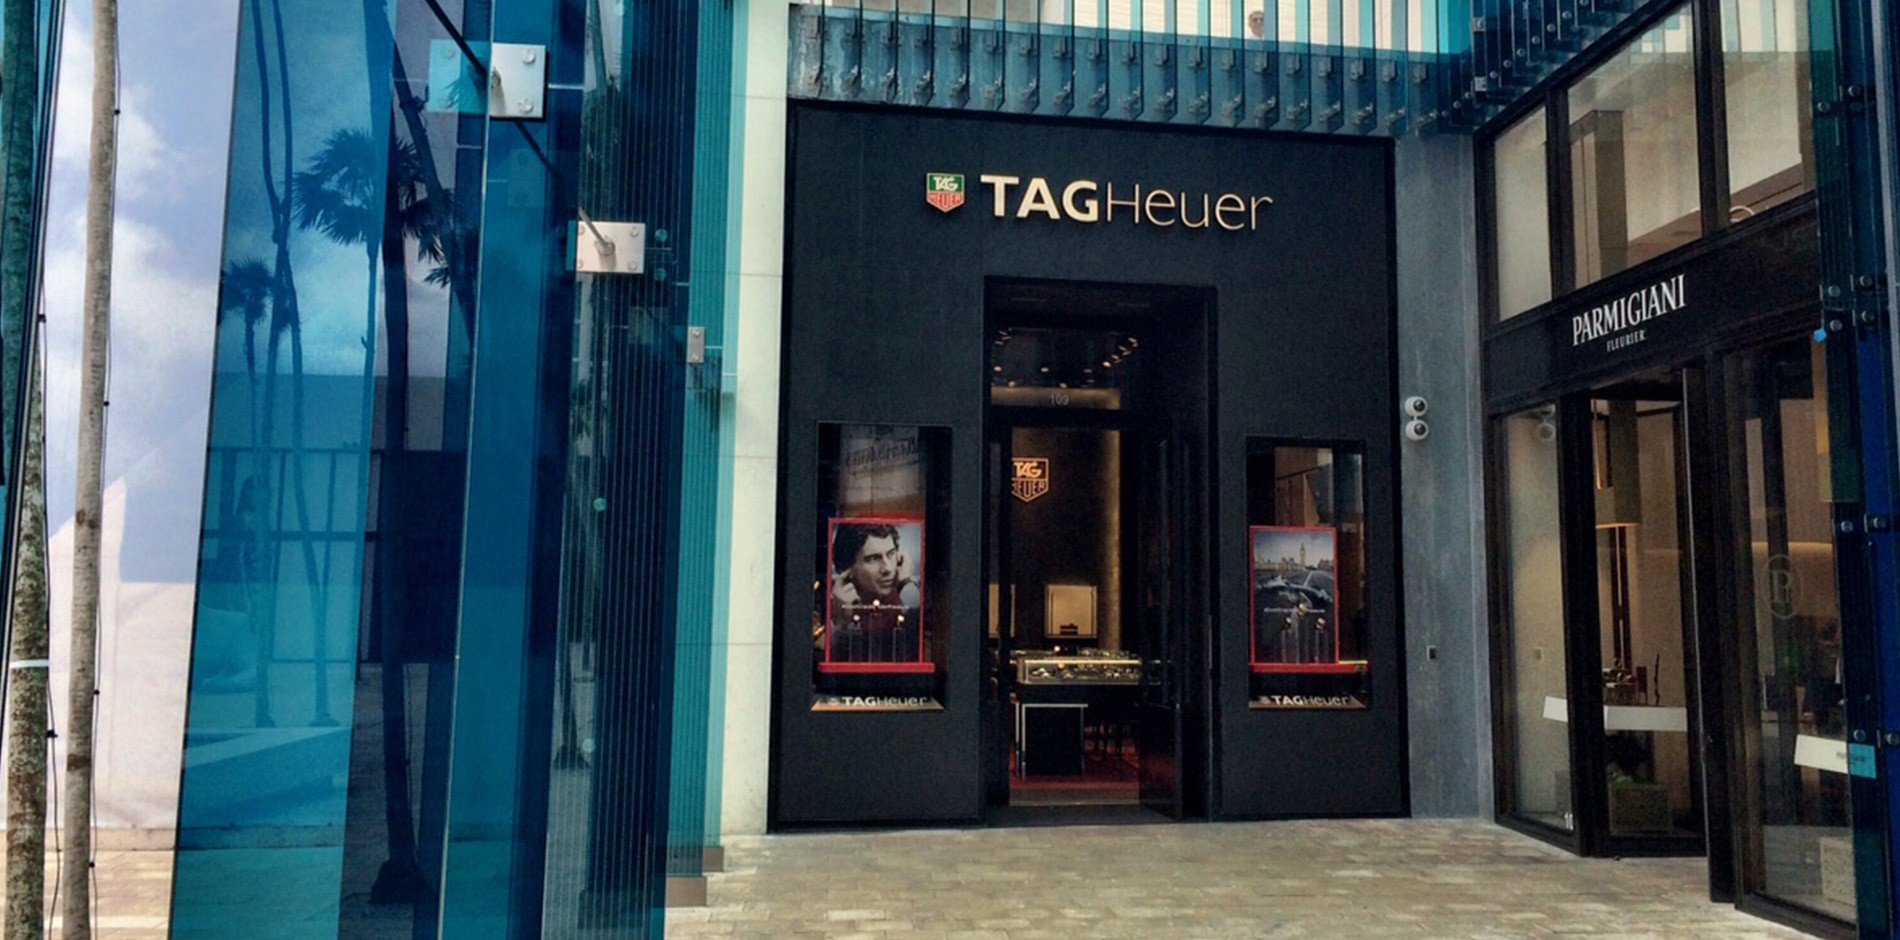 Tag Heuer One Of Many Shawmut Built Stores At Miami Design District